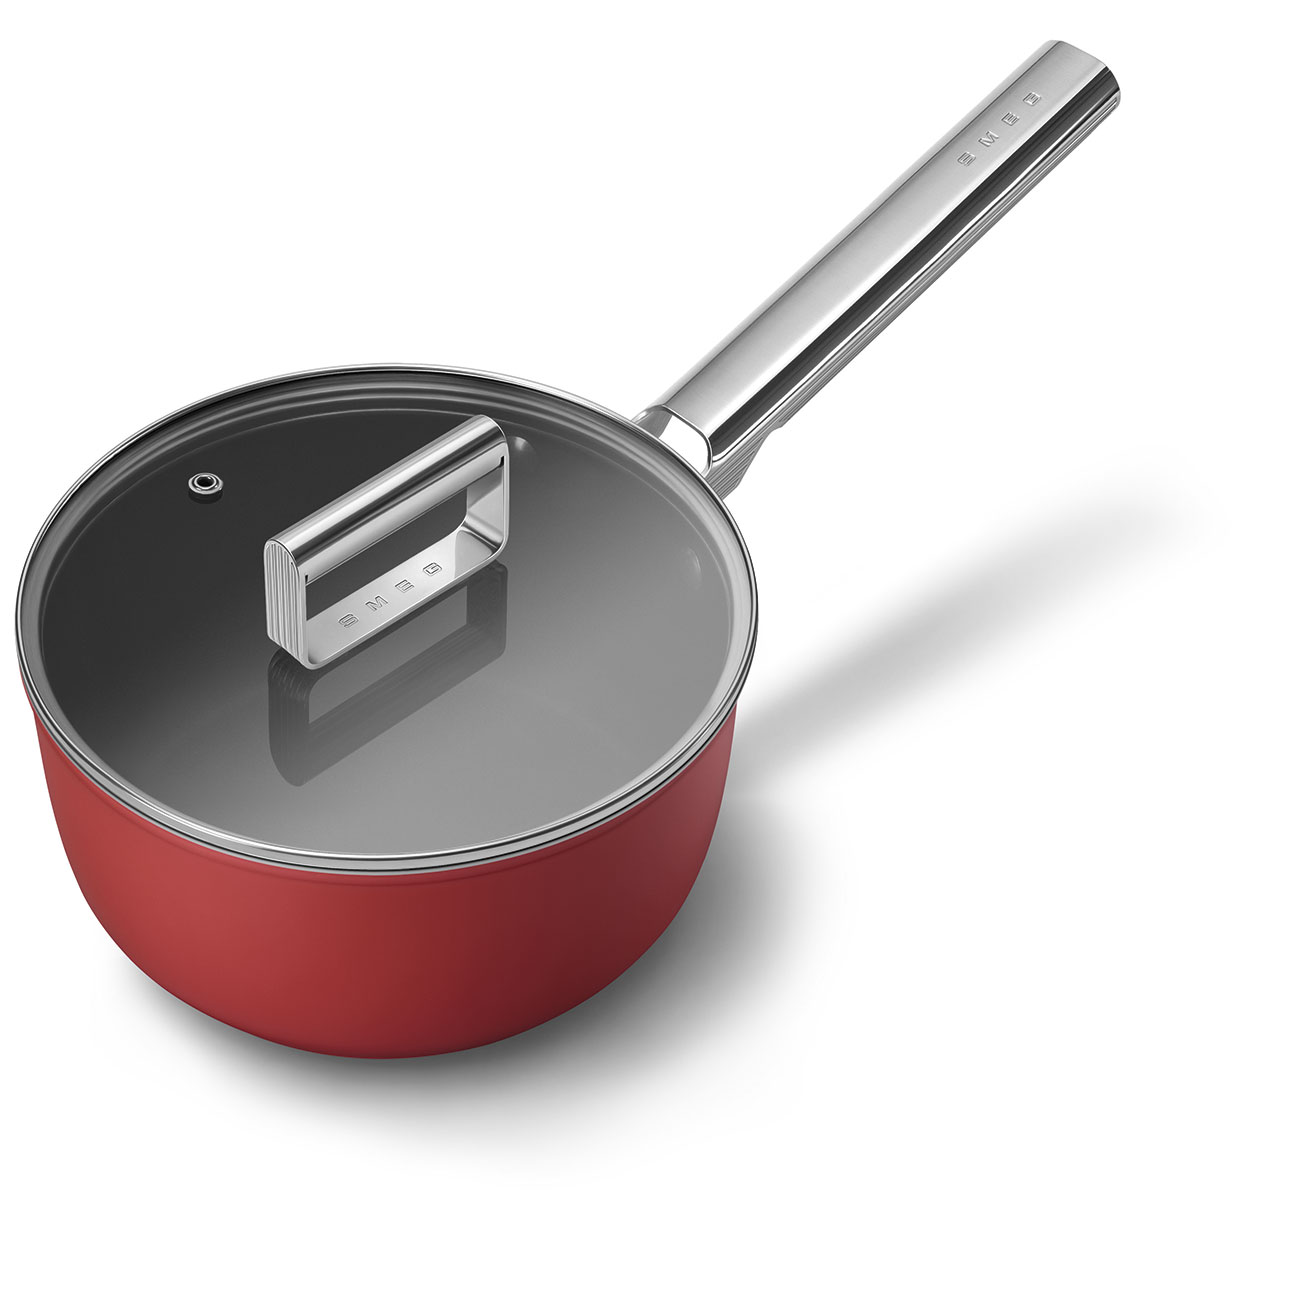 Smeg Red Non-stick Saucepan with glass lid and stainless steel handle_2